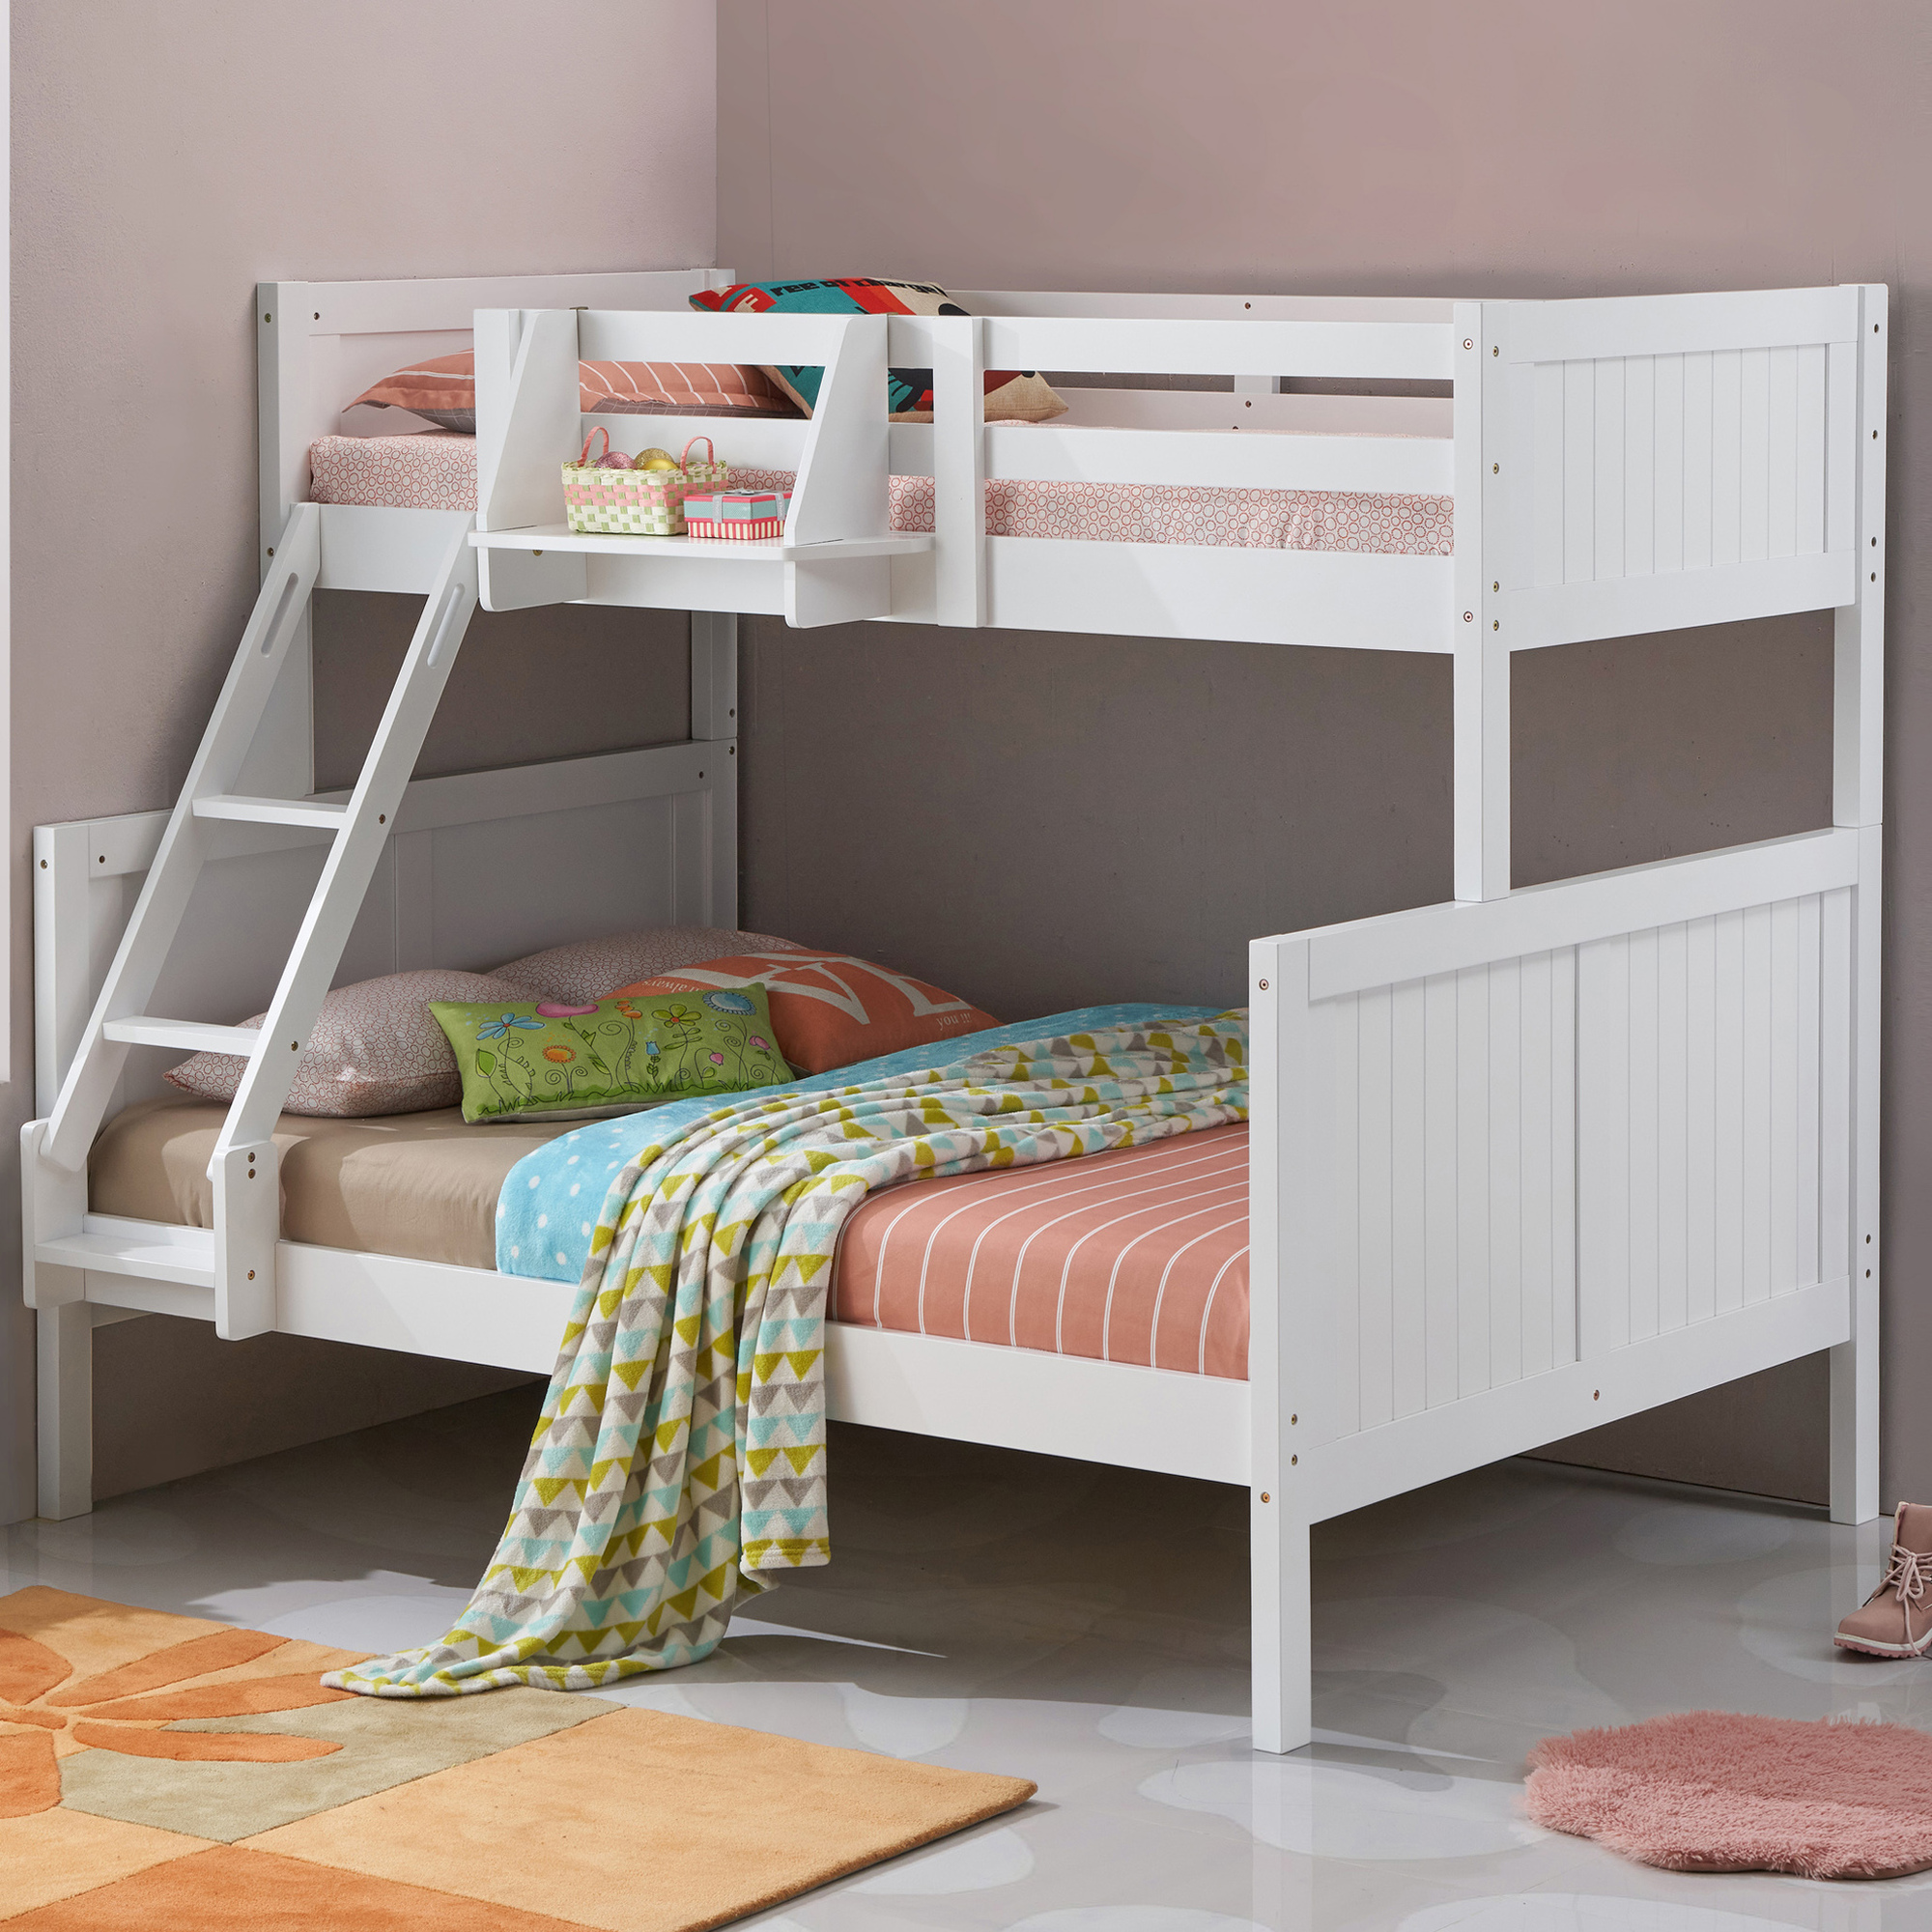 Over Double Bunk Bed With Hanging Shelf, Hanging Bunk Beds